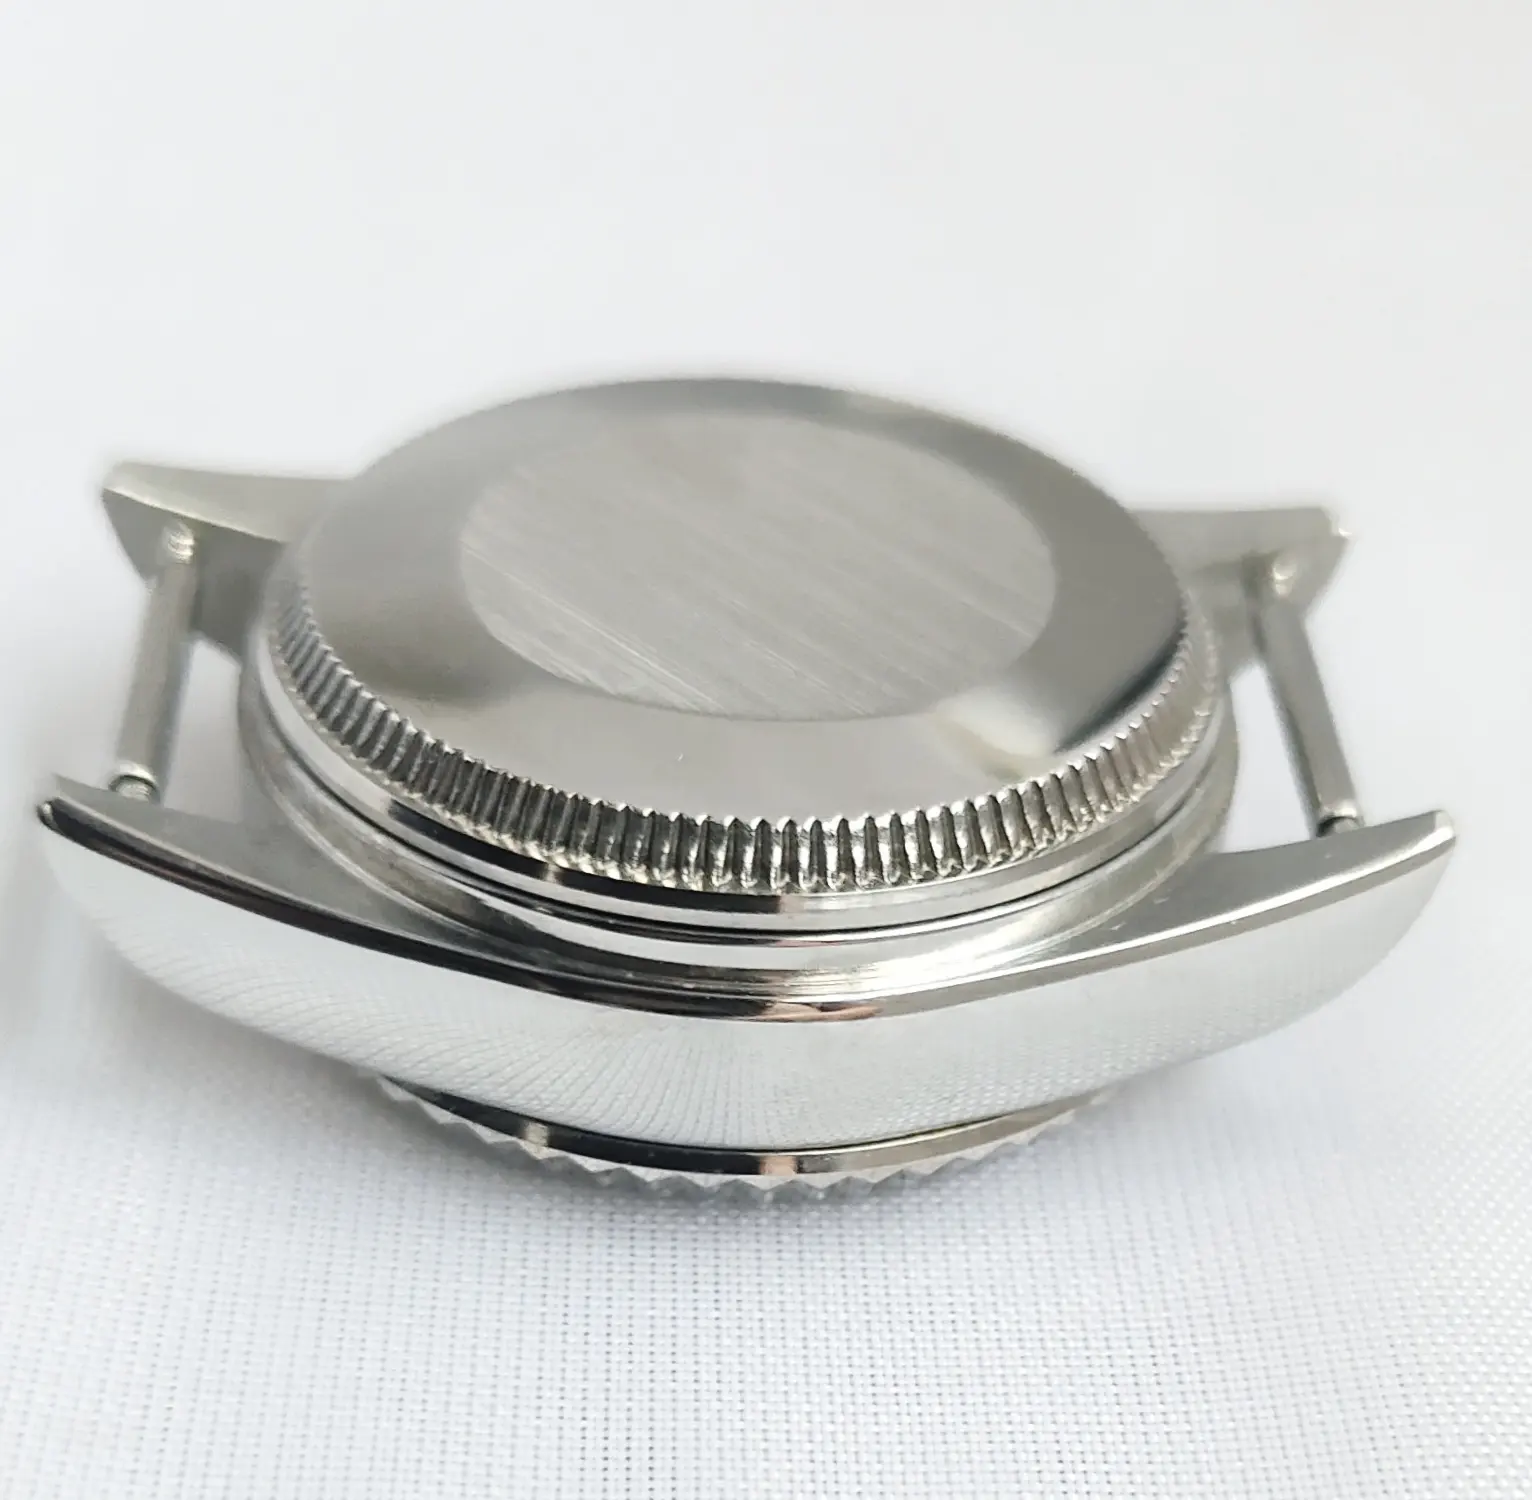 Newest Style Modern Surgical Standard Stainless Steel Mineral Glass Watch Case Part